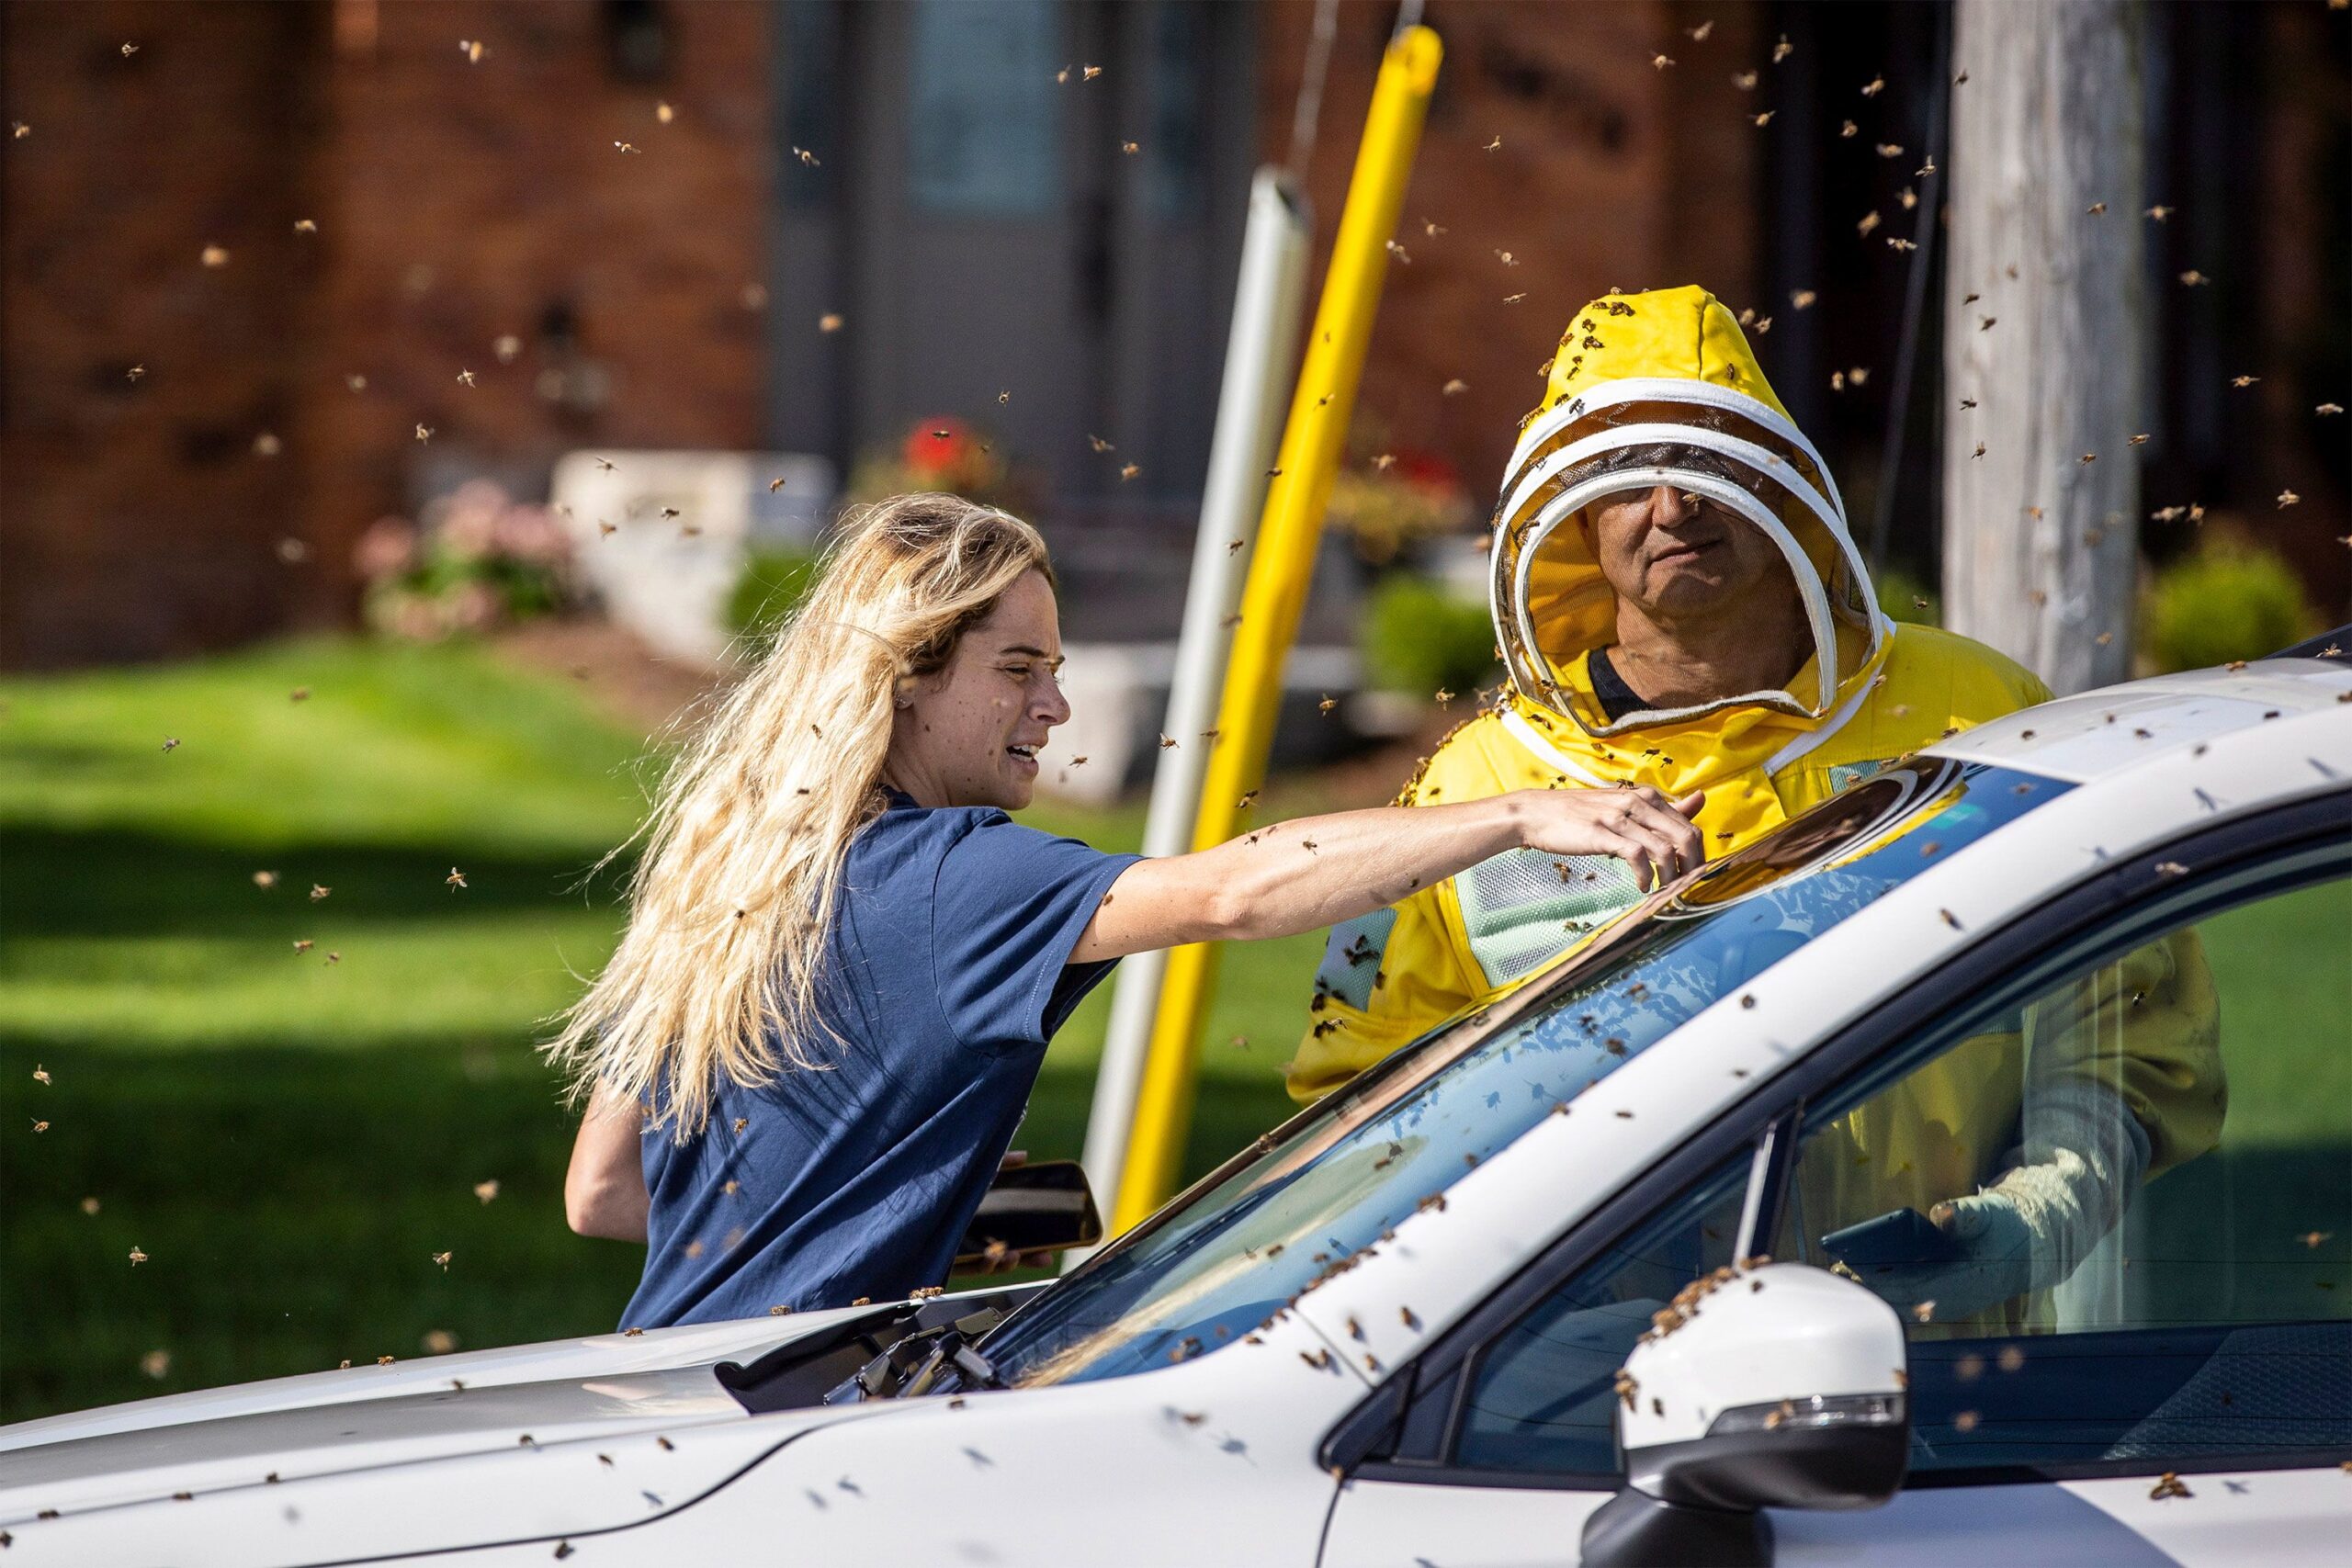 Beekeepers Terri Faloney, left, and Tyler Trute remove bees from a car on Wednesday. (Carlos Osorio...